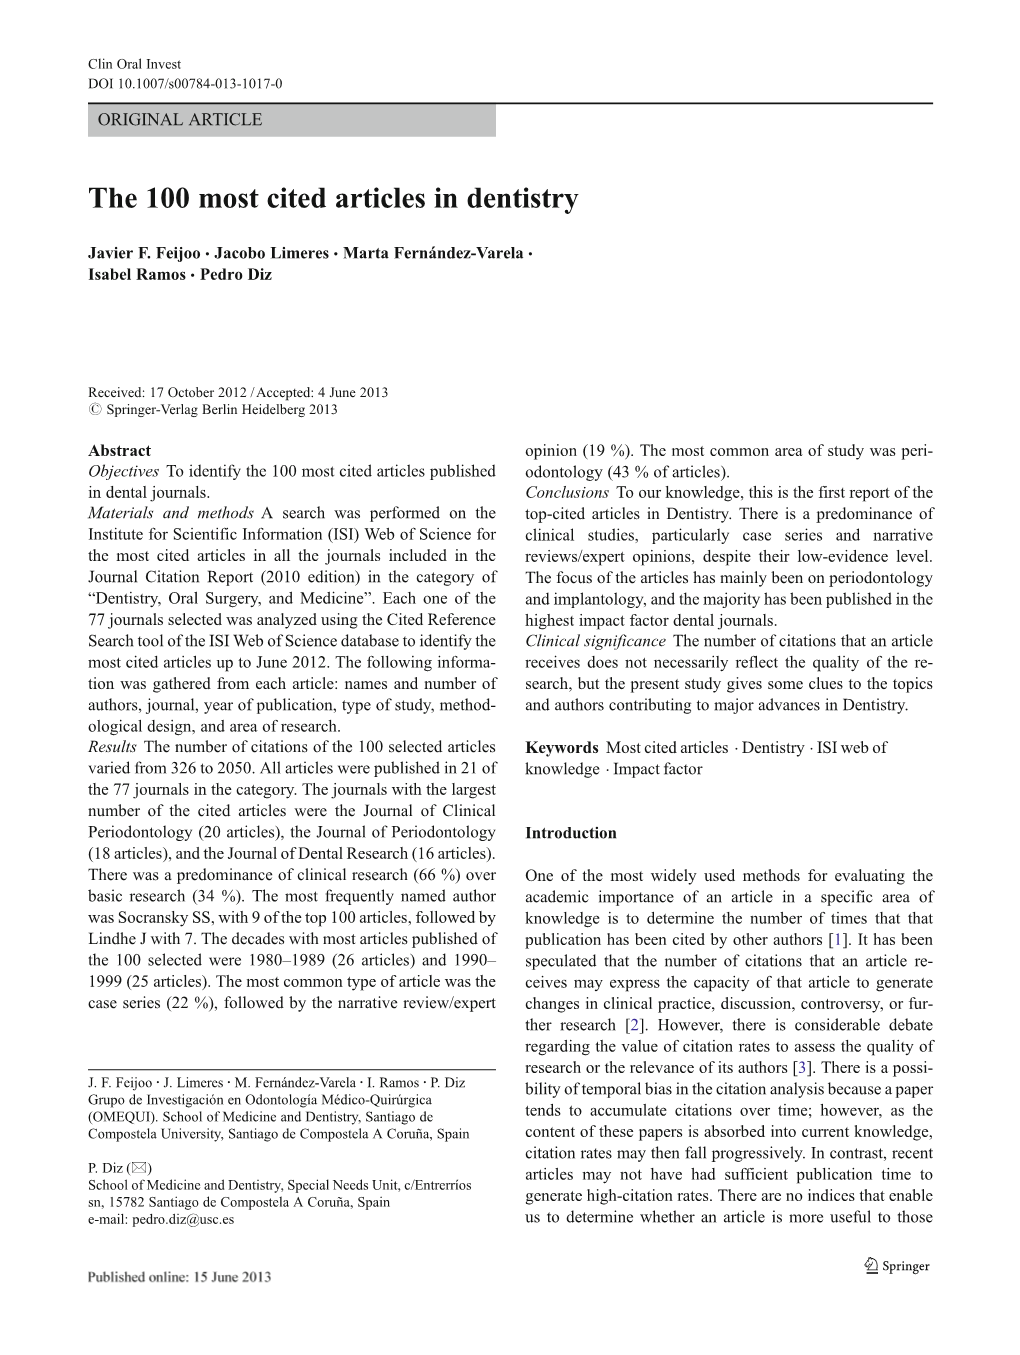 The 100 Most Cited Articles in Dentistry